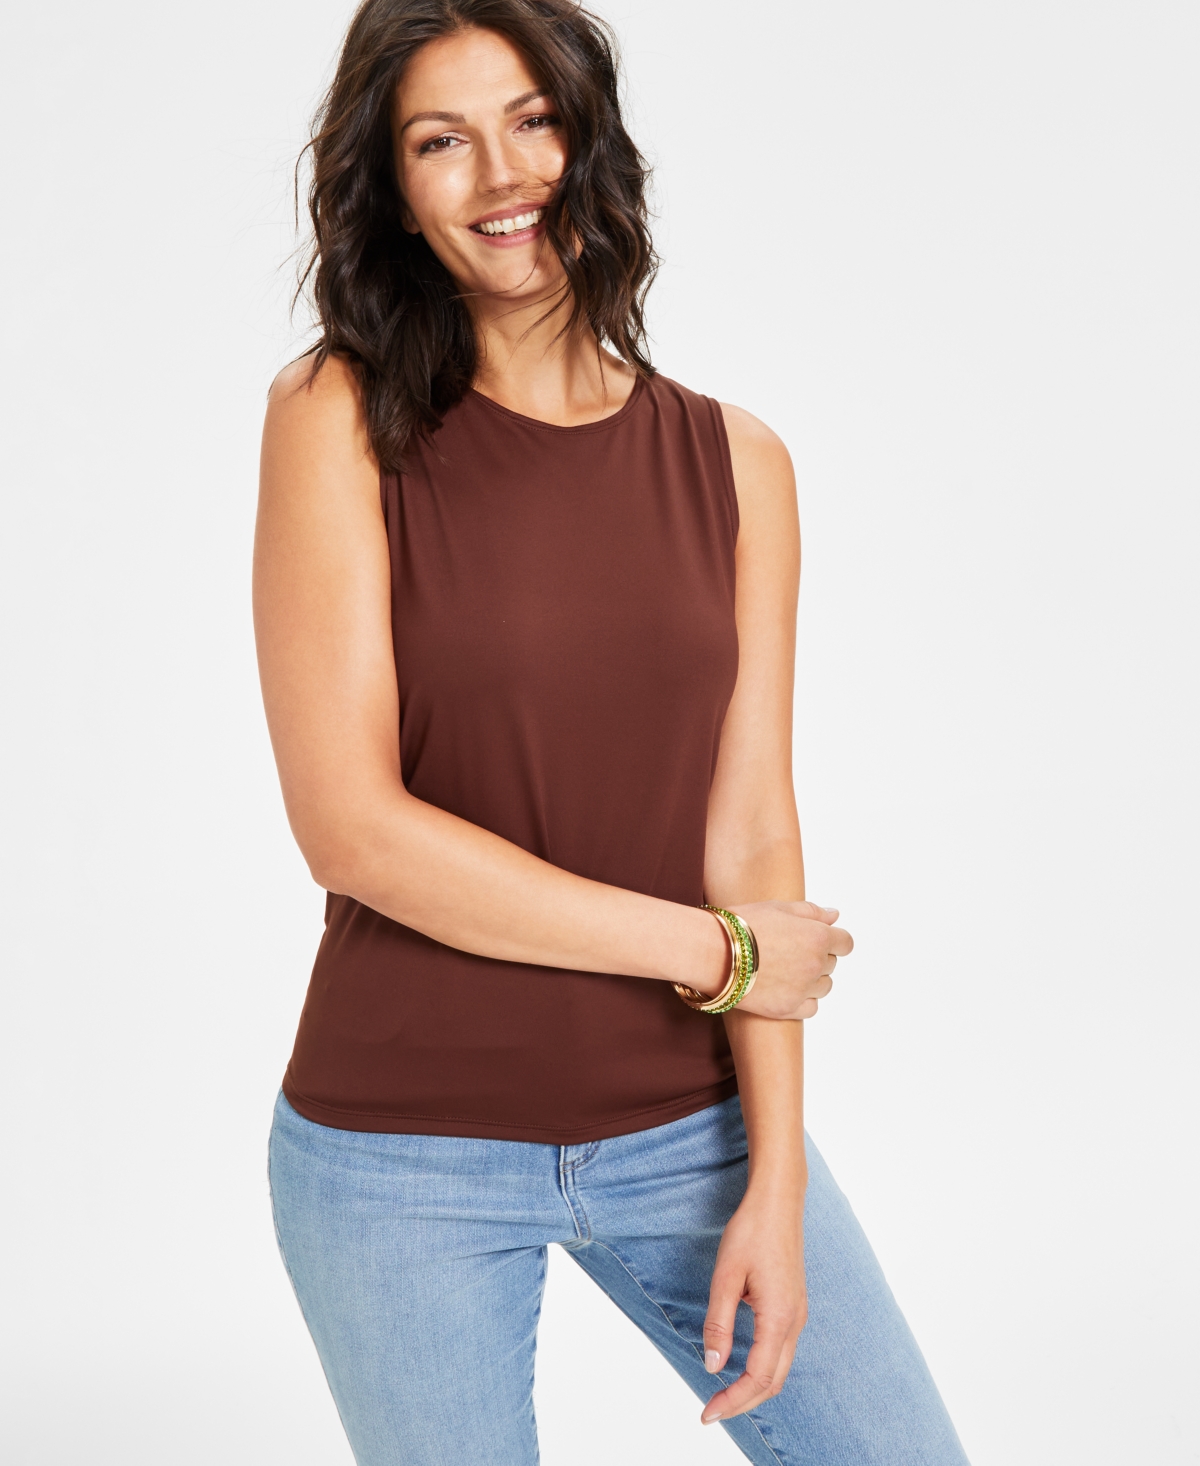 Women's Crewneck Layering Tank Top, Created for Macy's - Hickory Spice